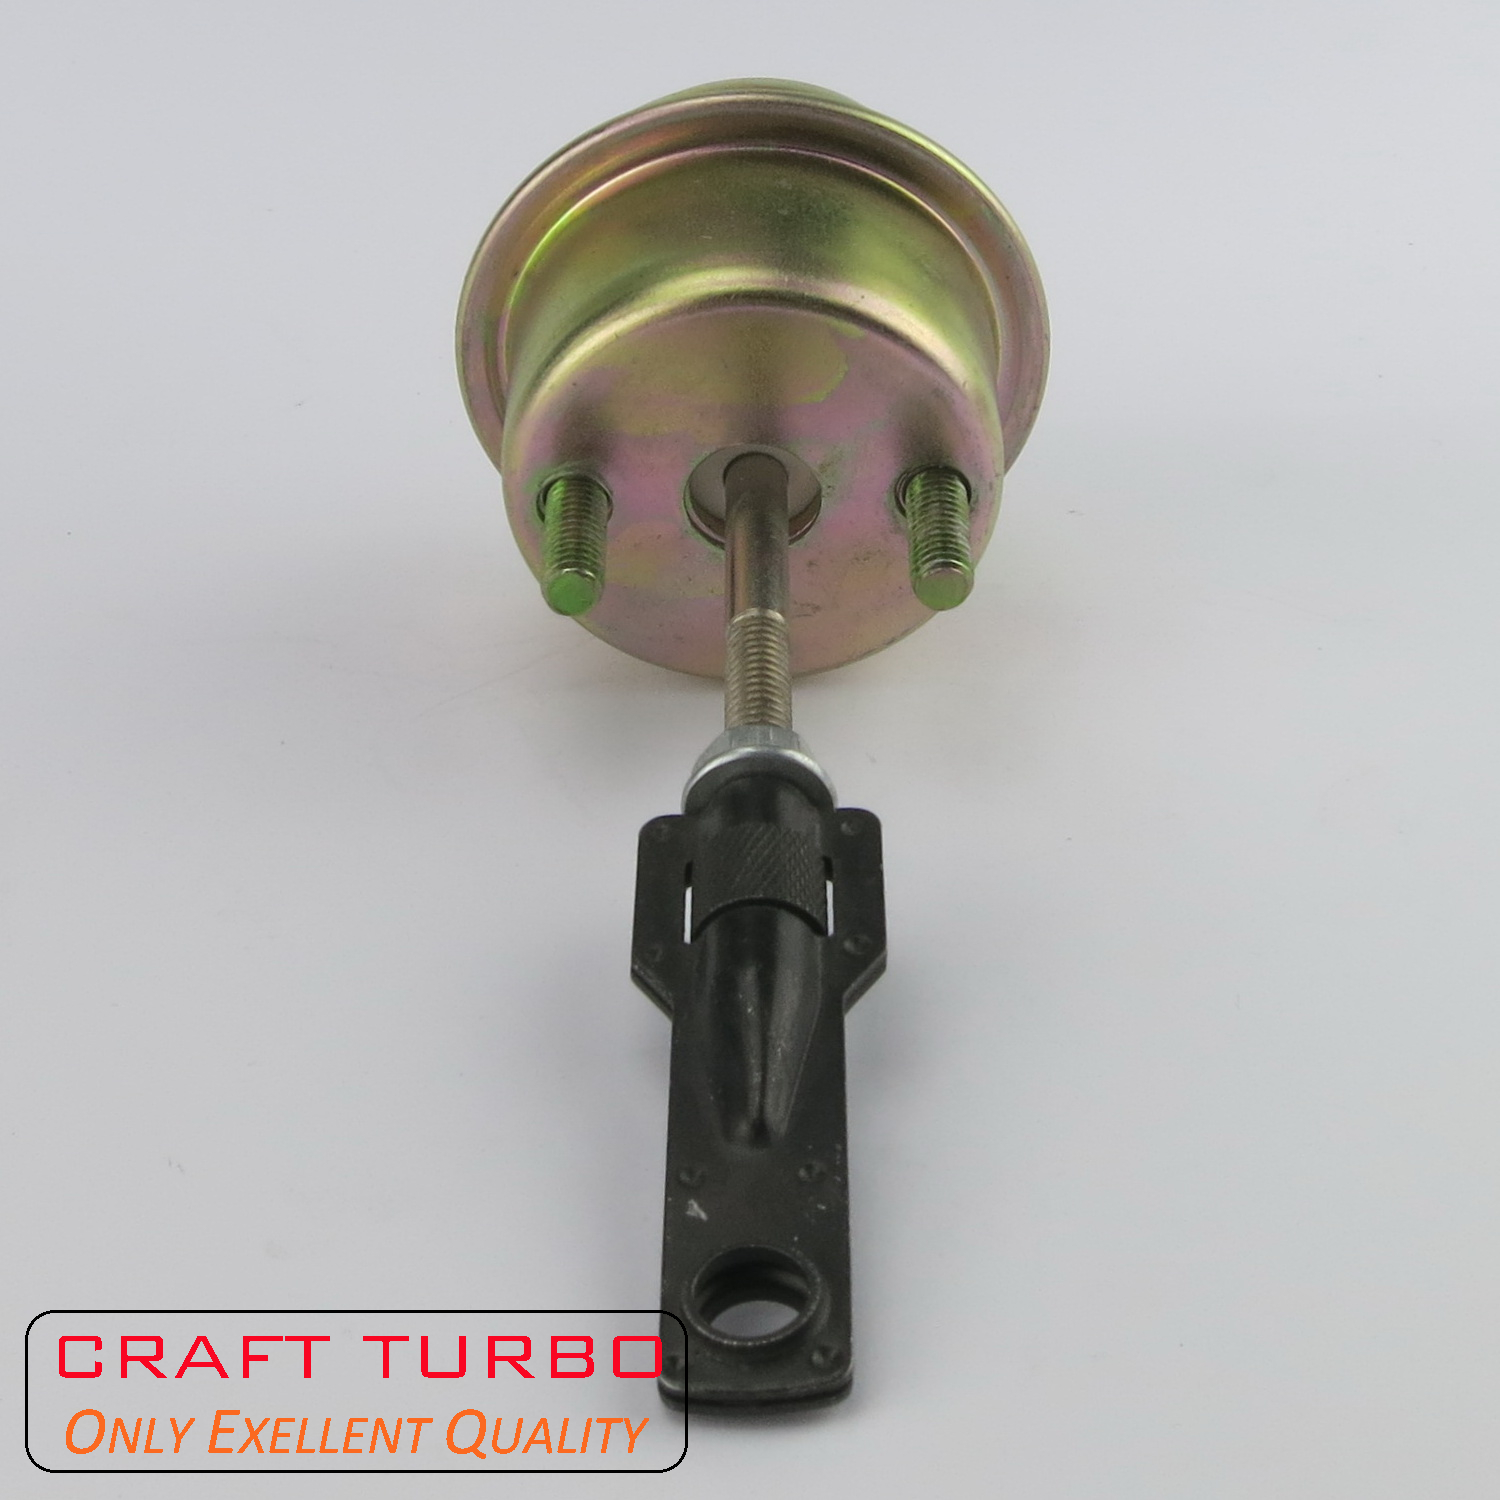 GT1549 Actuator for Turbochargers